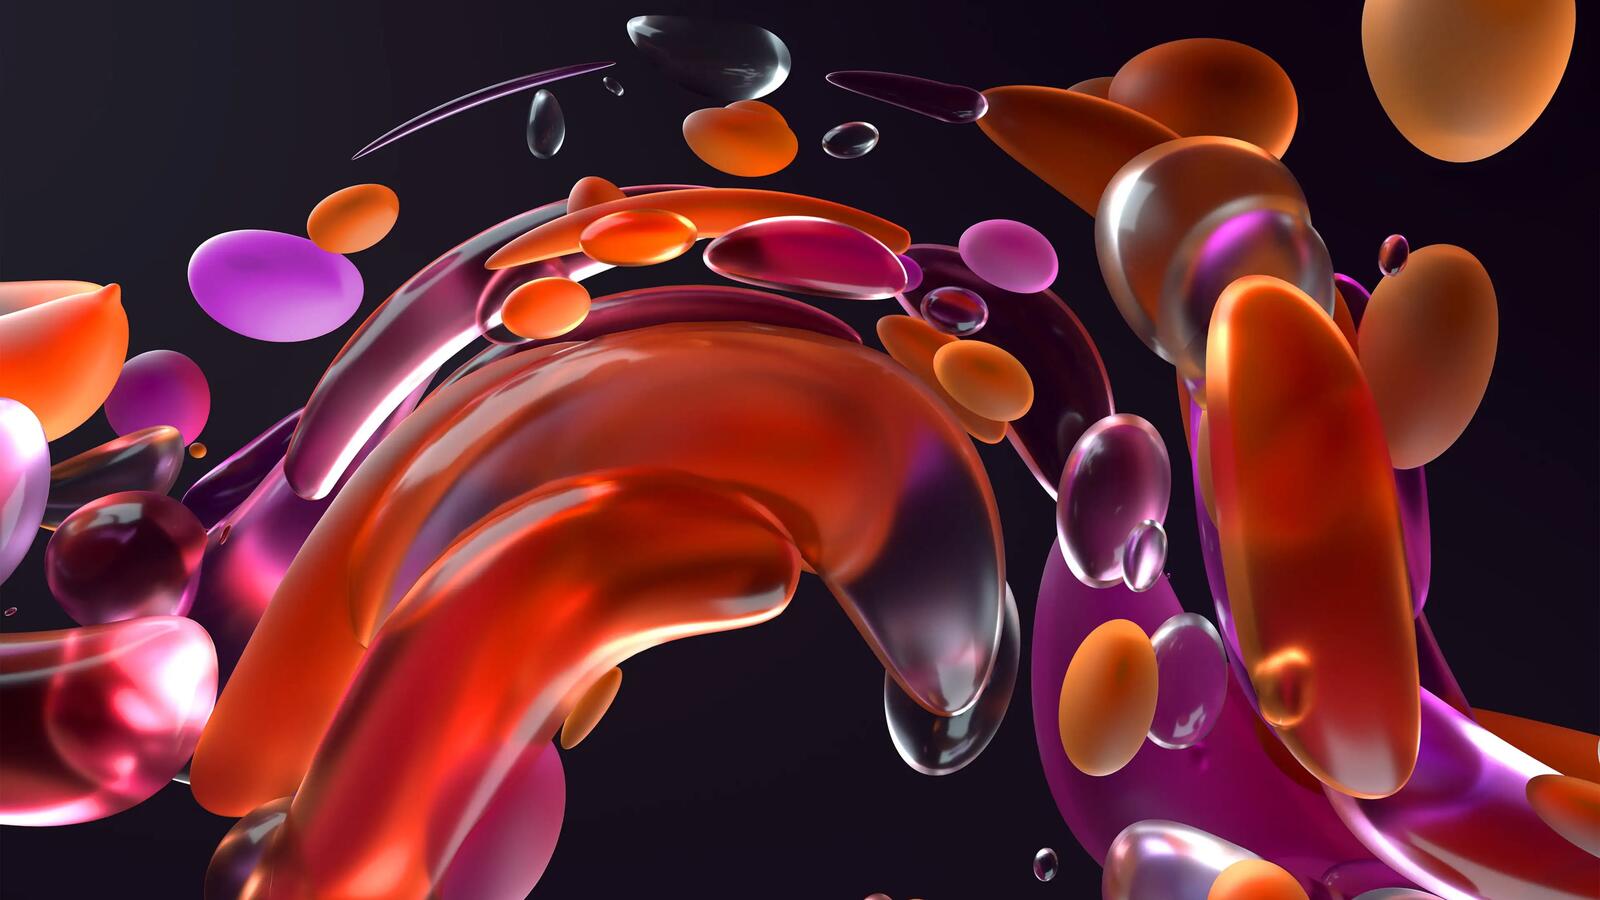 Wallpapers colorful wallpaper floating bubbles windows stock photo on the desktop